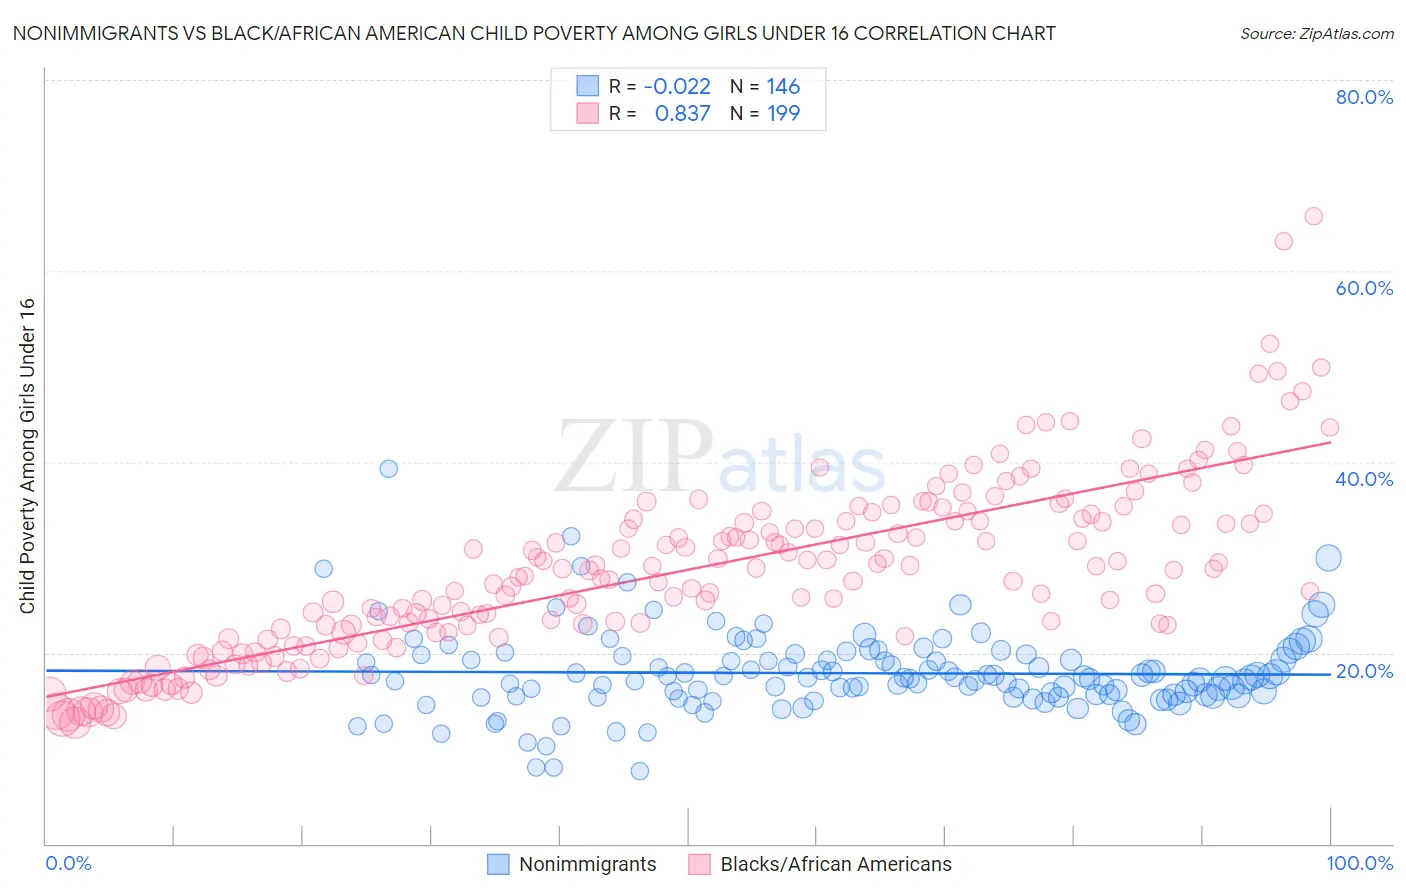 Nonimmigrants vs Black/African American Child Poverty Among Girls Under 16